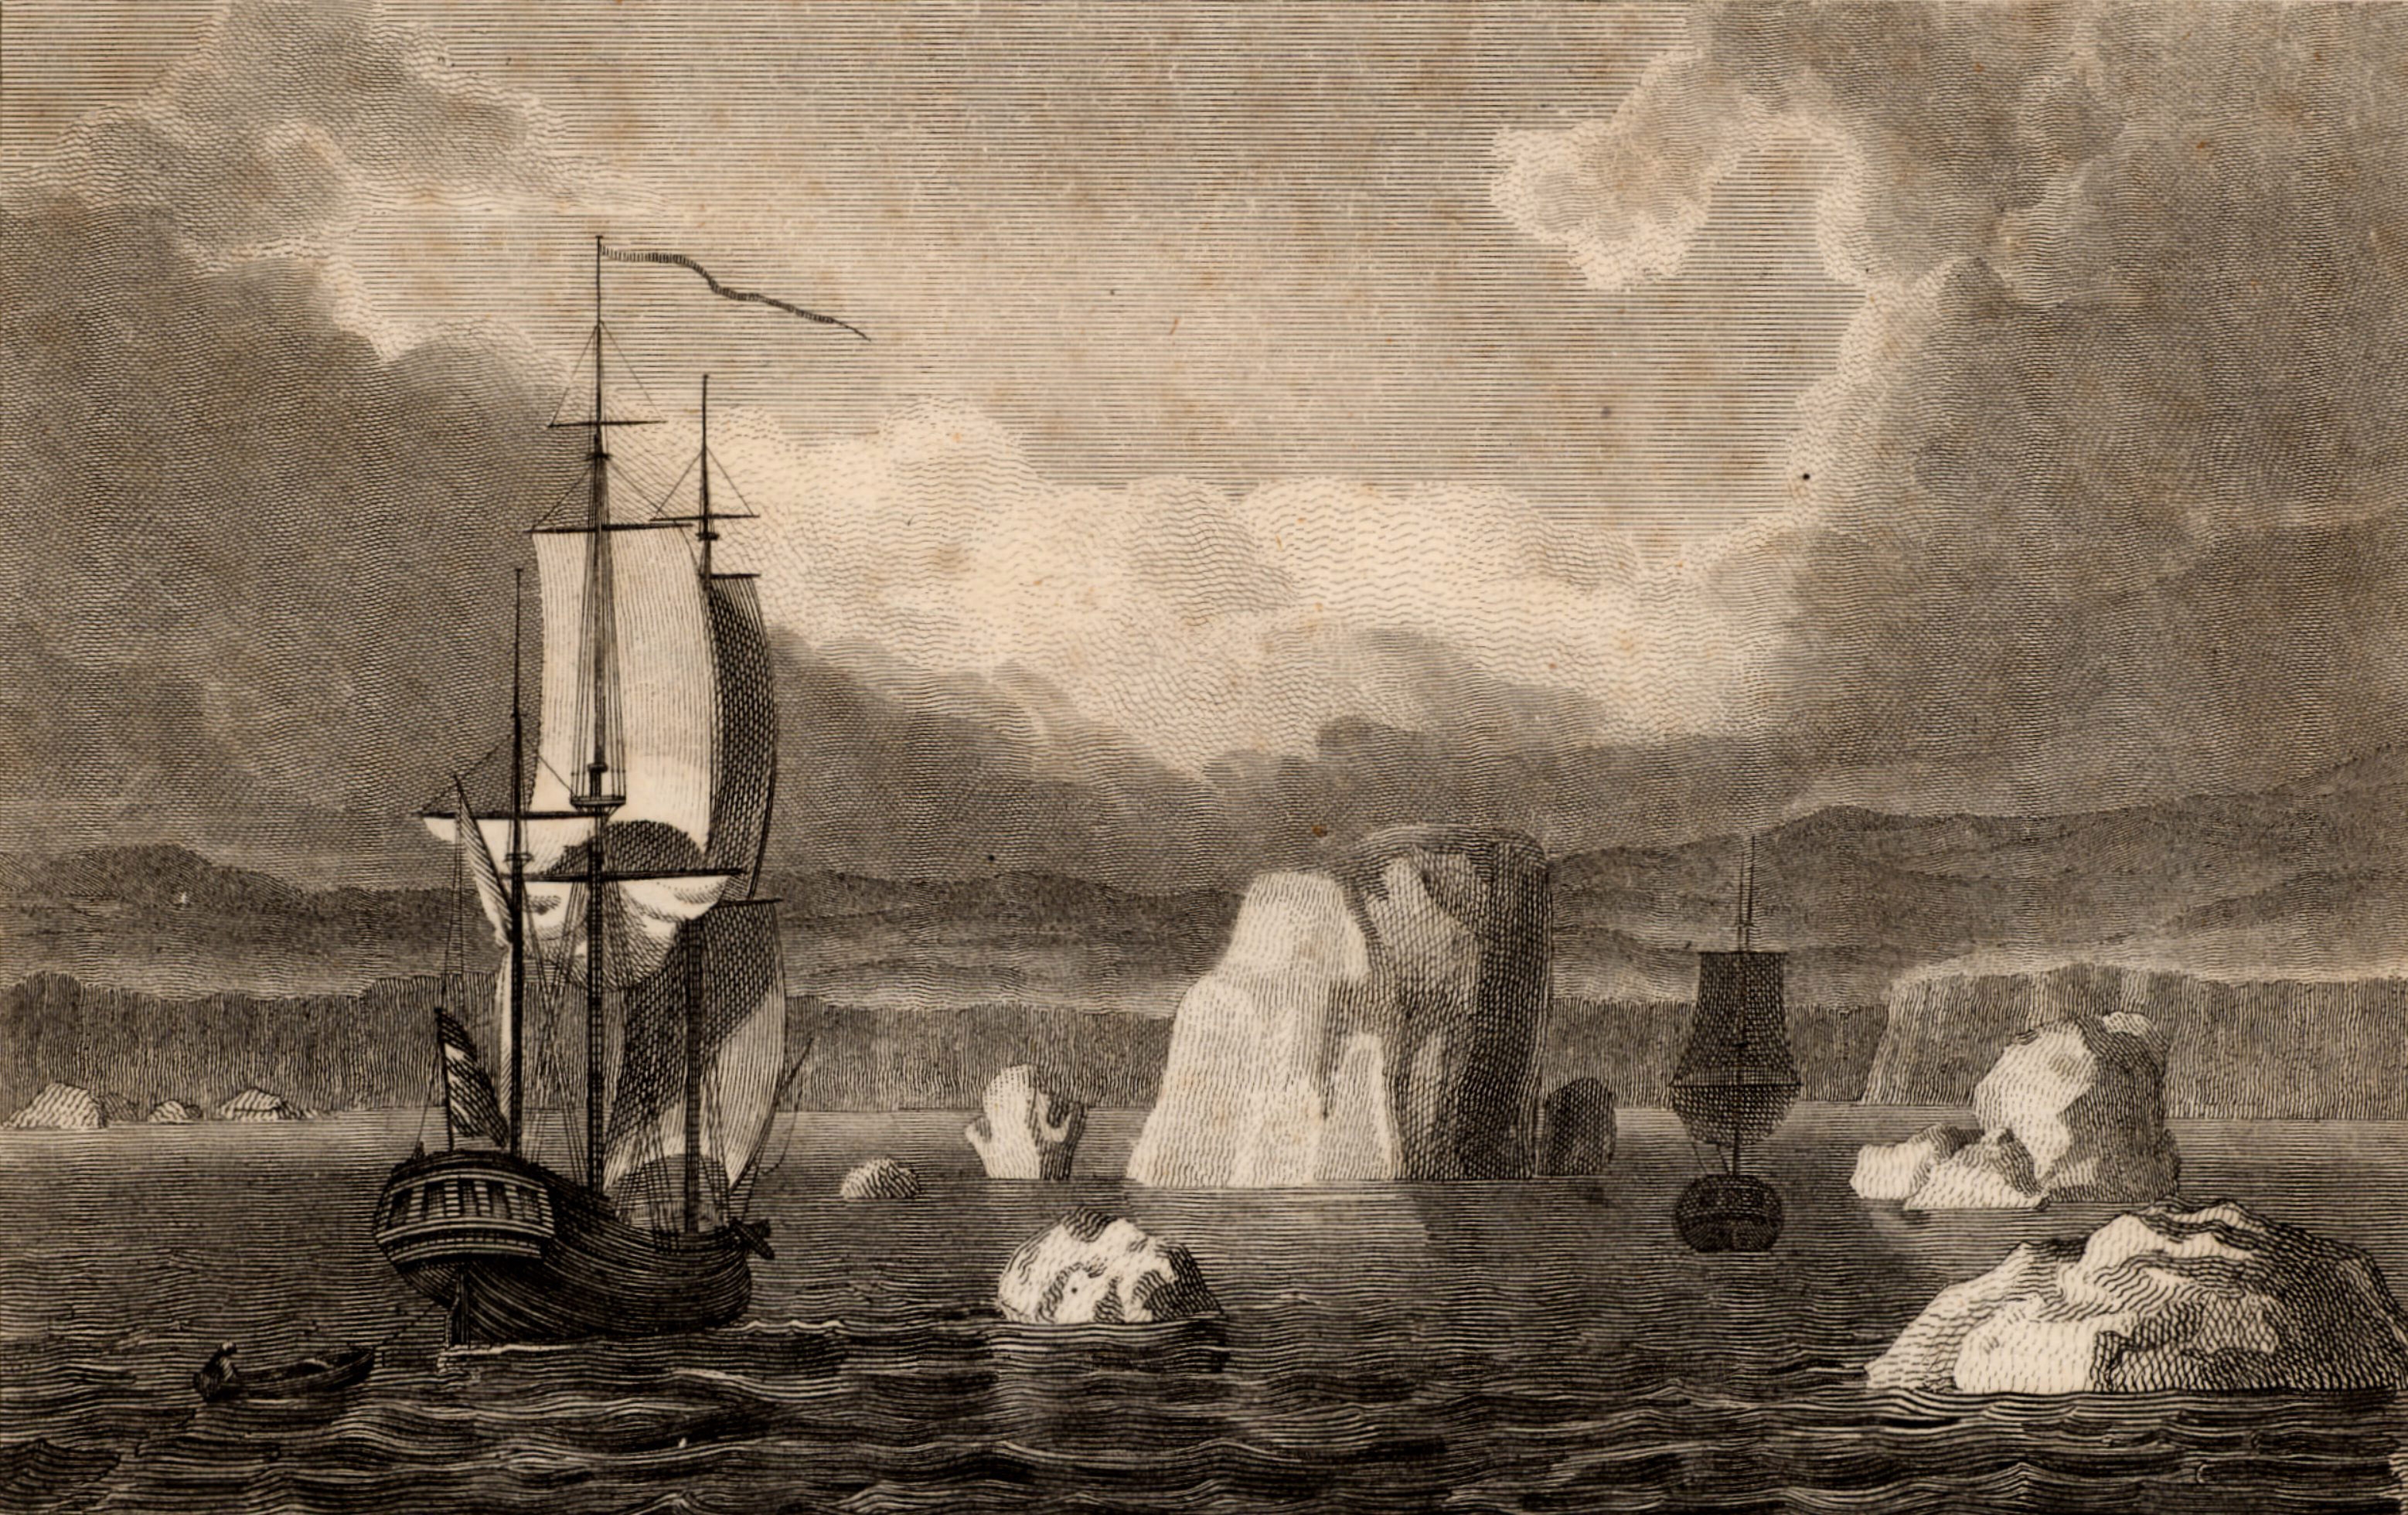 Sailing ships among icebergs in the Arctic Circle. Engraving from The Gallery of Nature and Art by the Rev. Edward Polehampton (London, 1815).